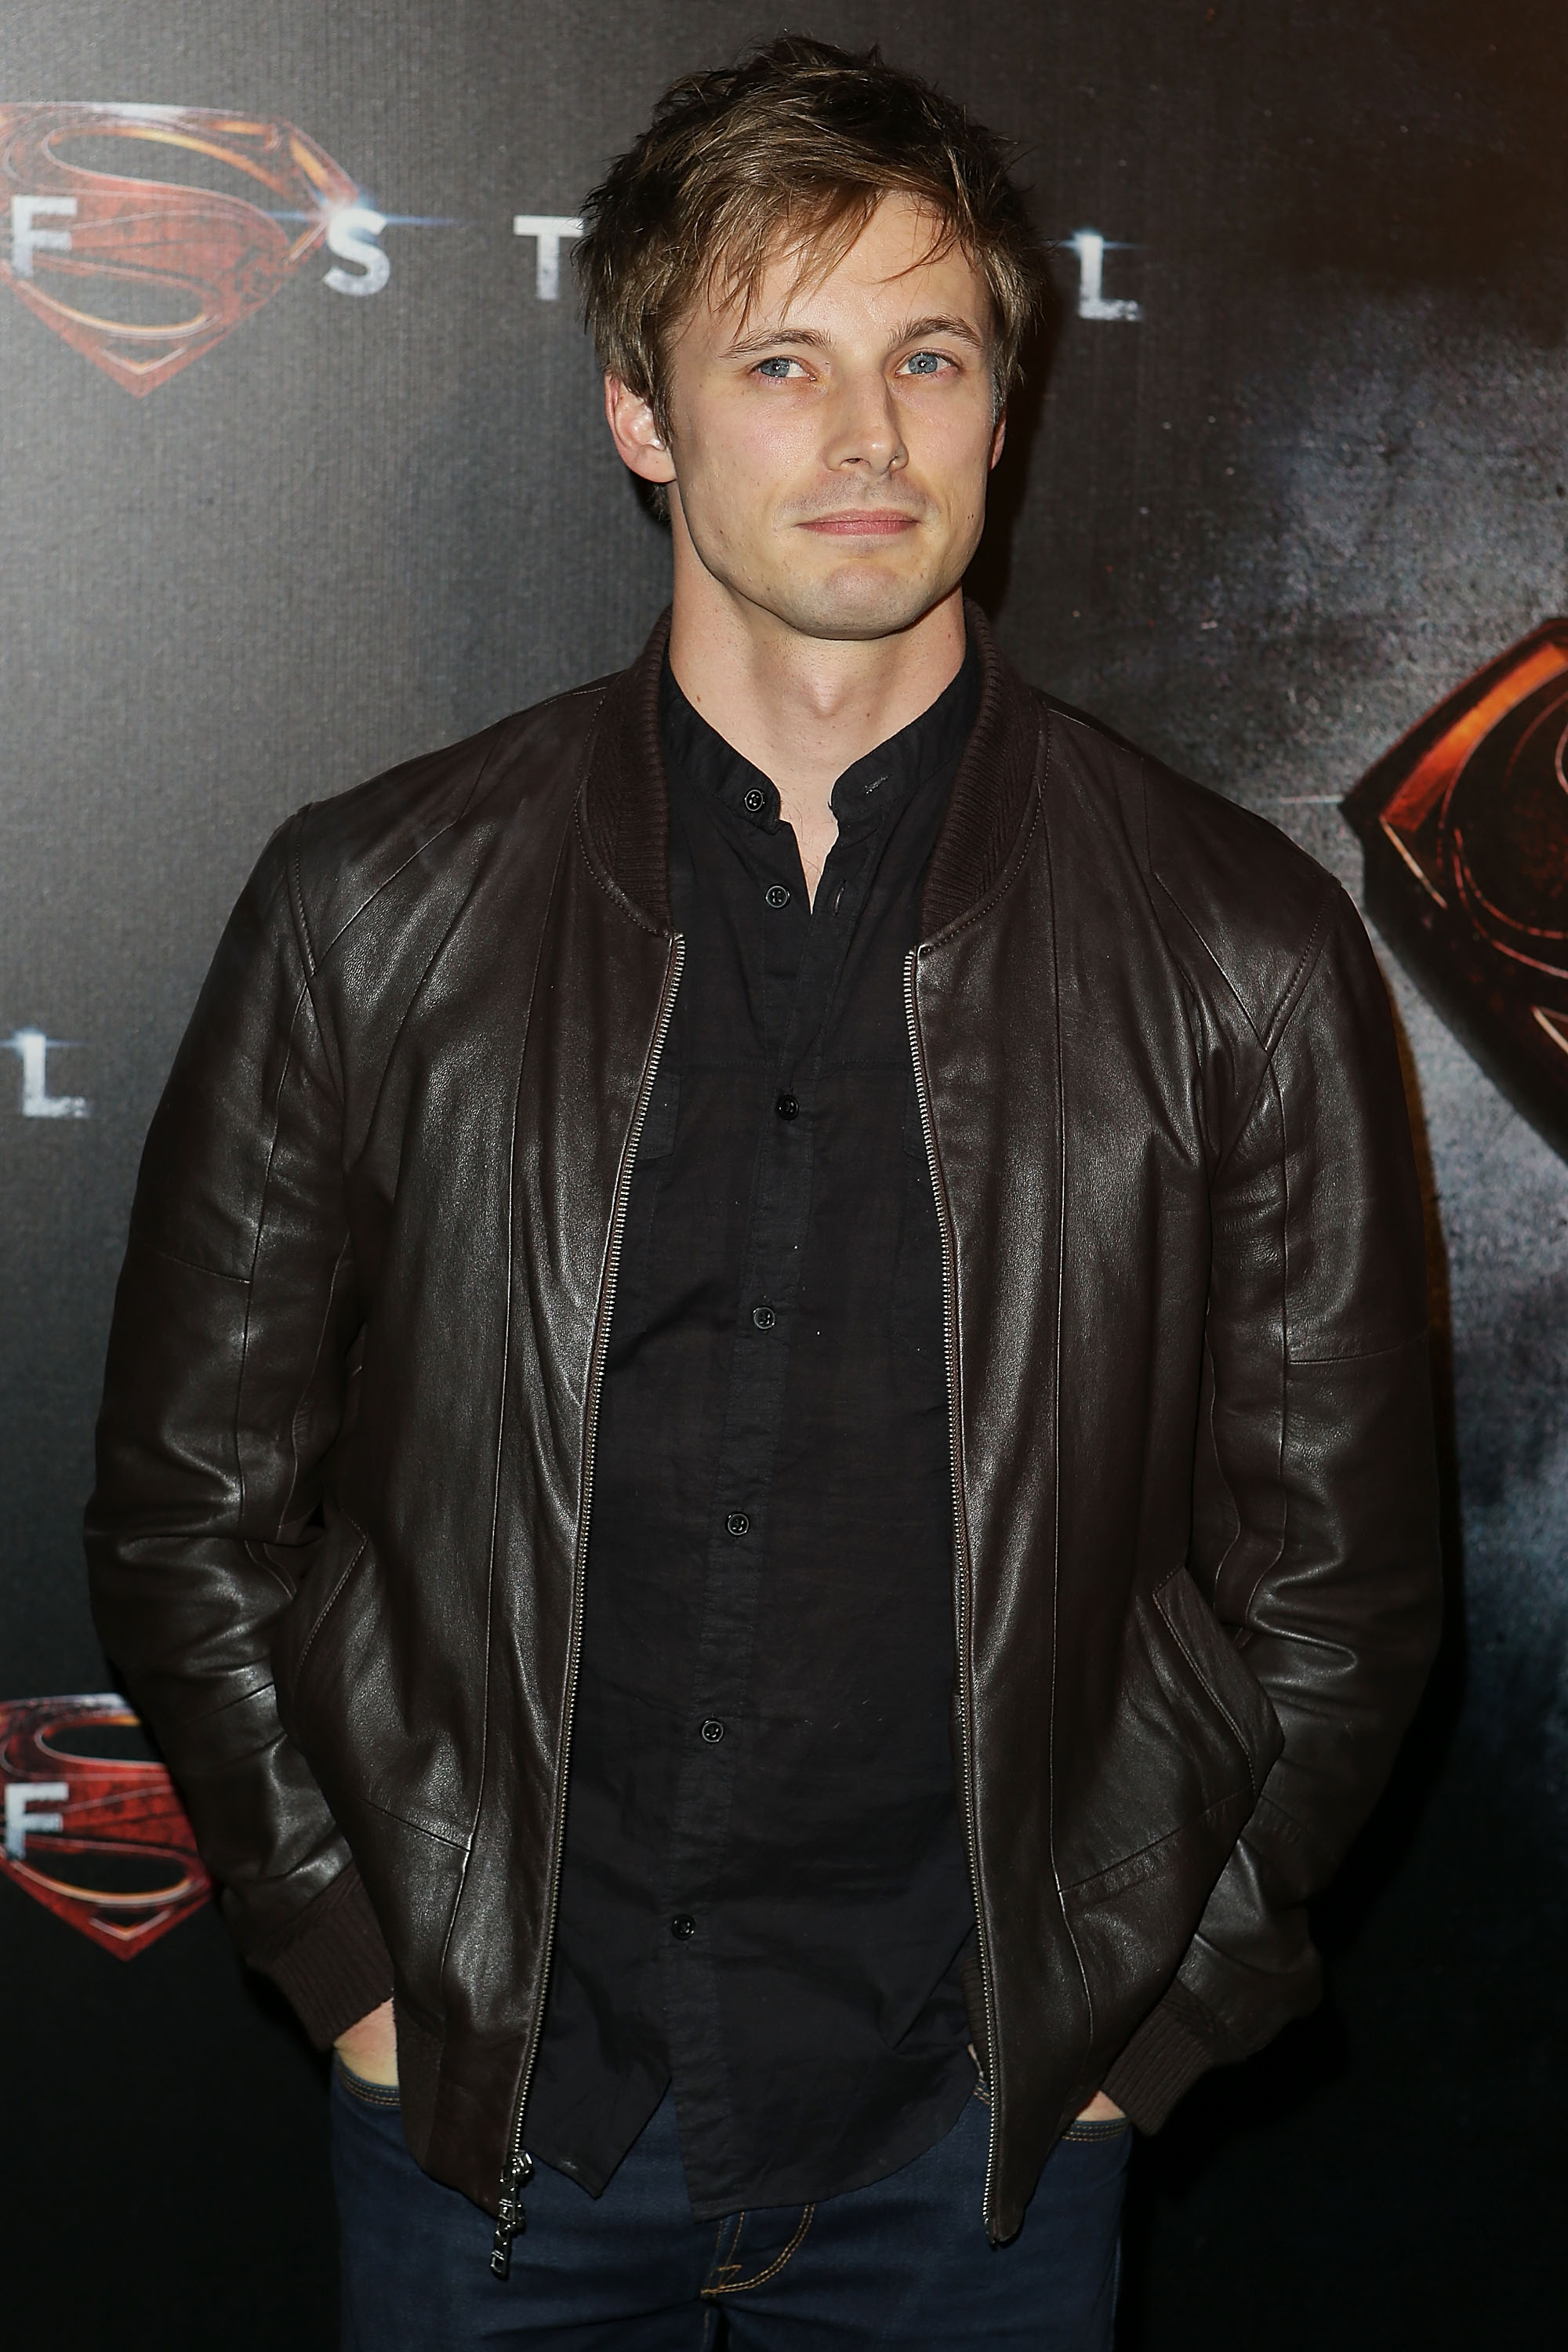 Picture of Bradley James in General Pictures - bradley-james-1372627434 ...